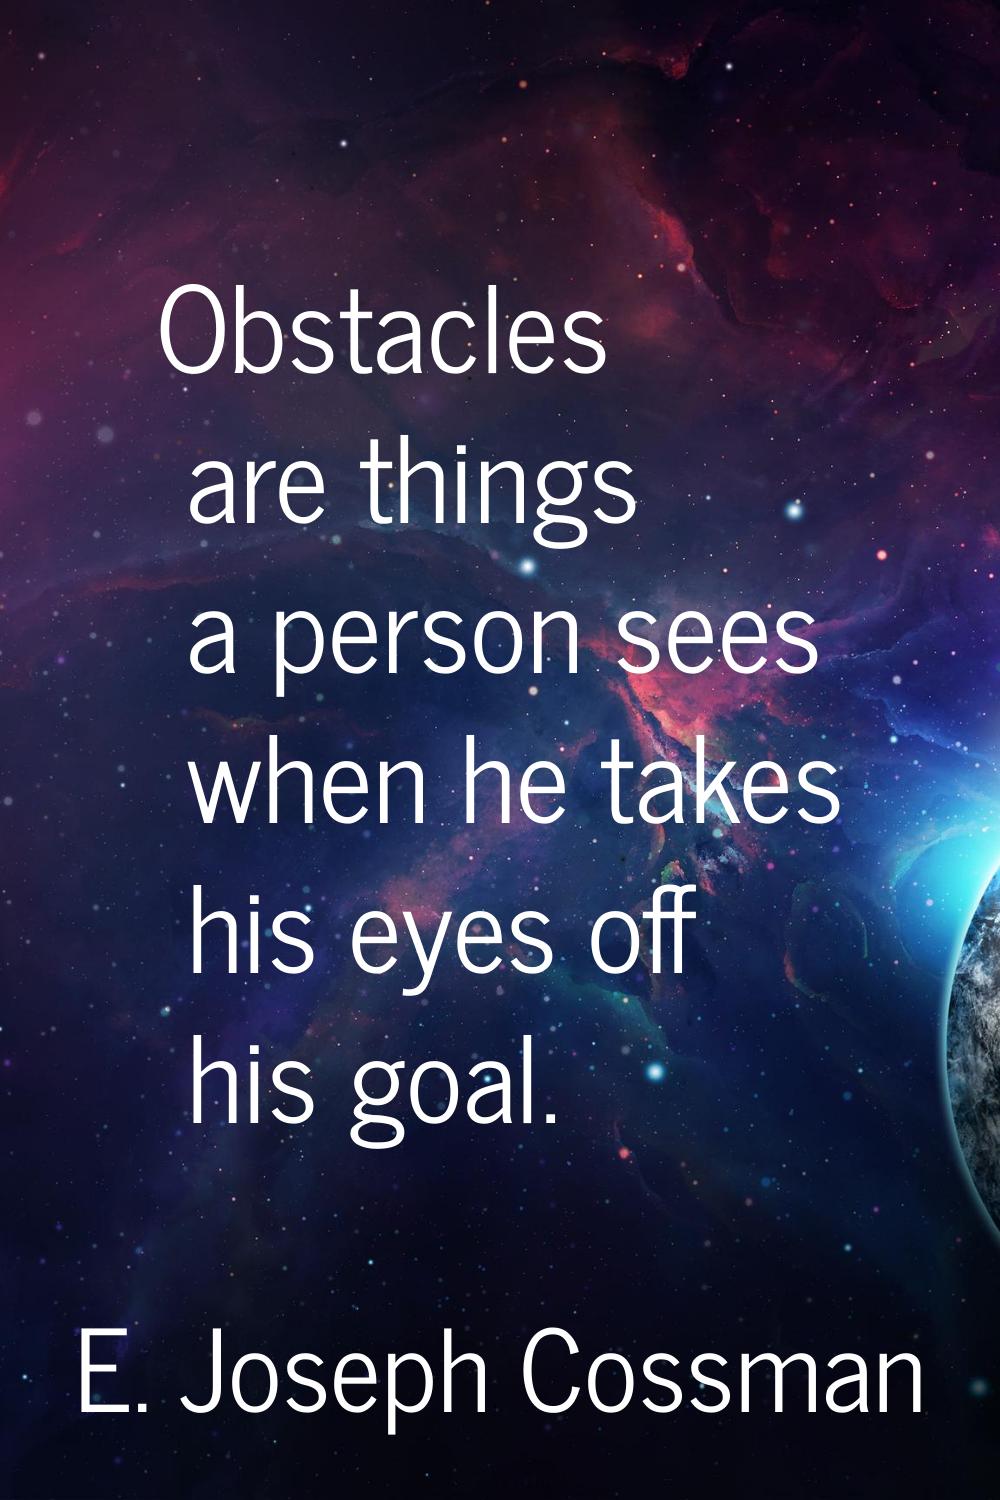 Obstacles are things a person sees when he takes his eyes off his goal.